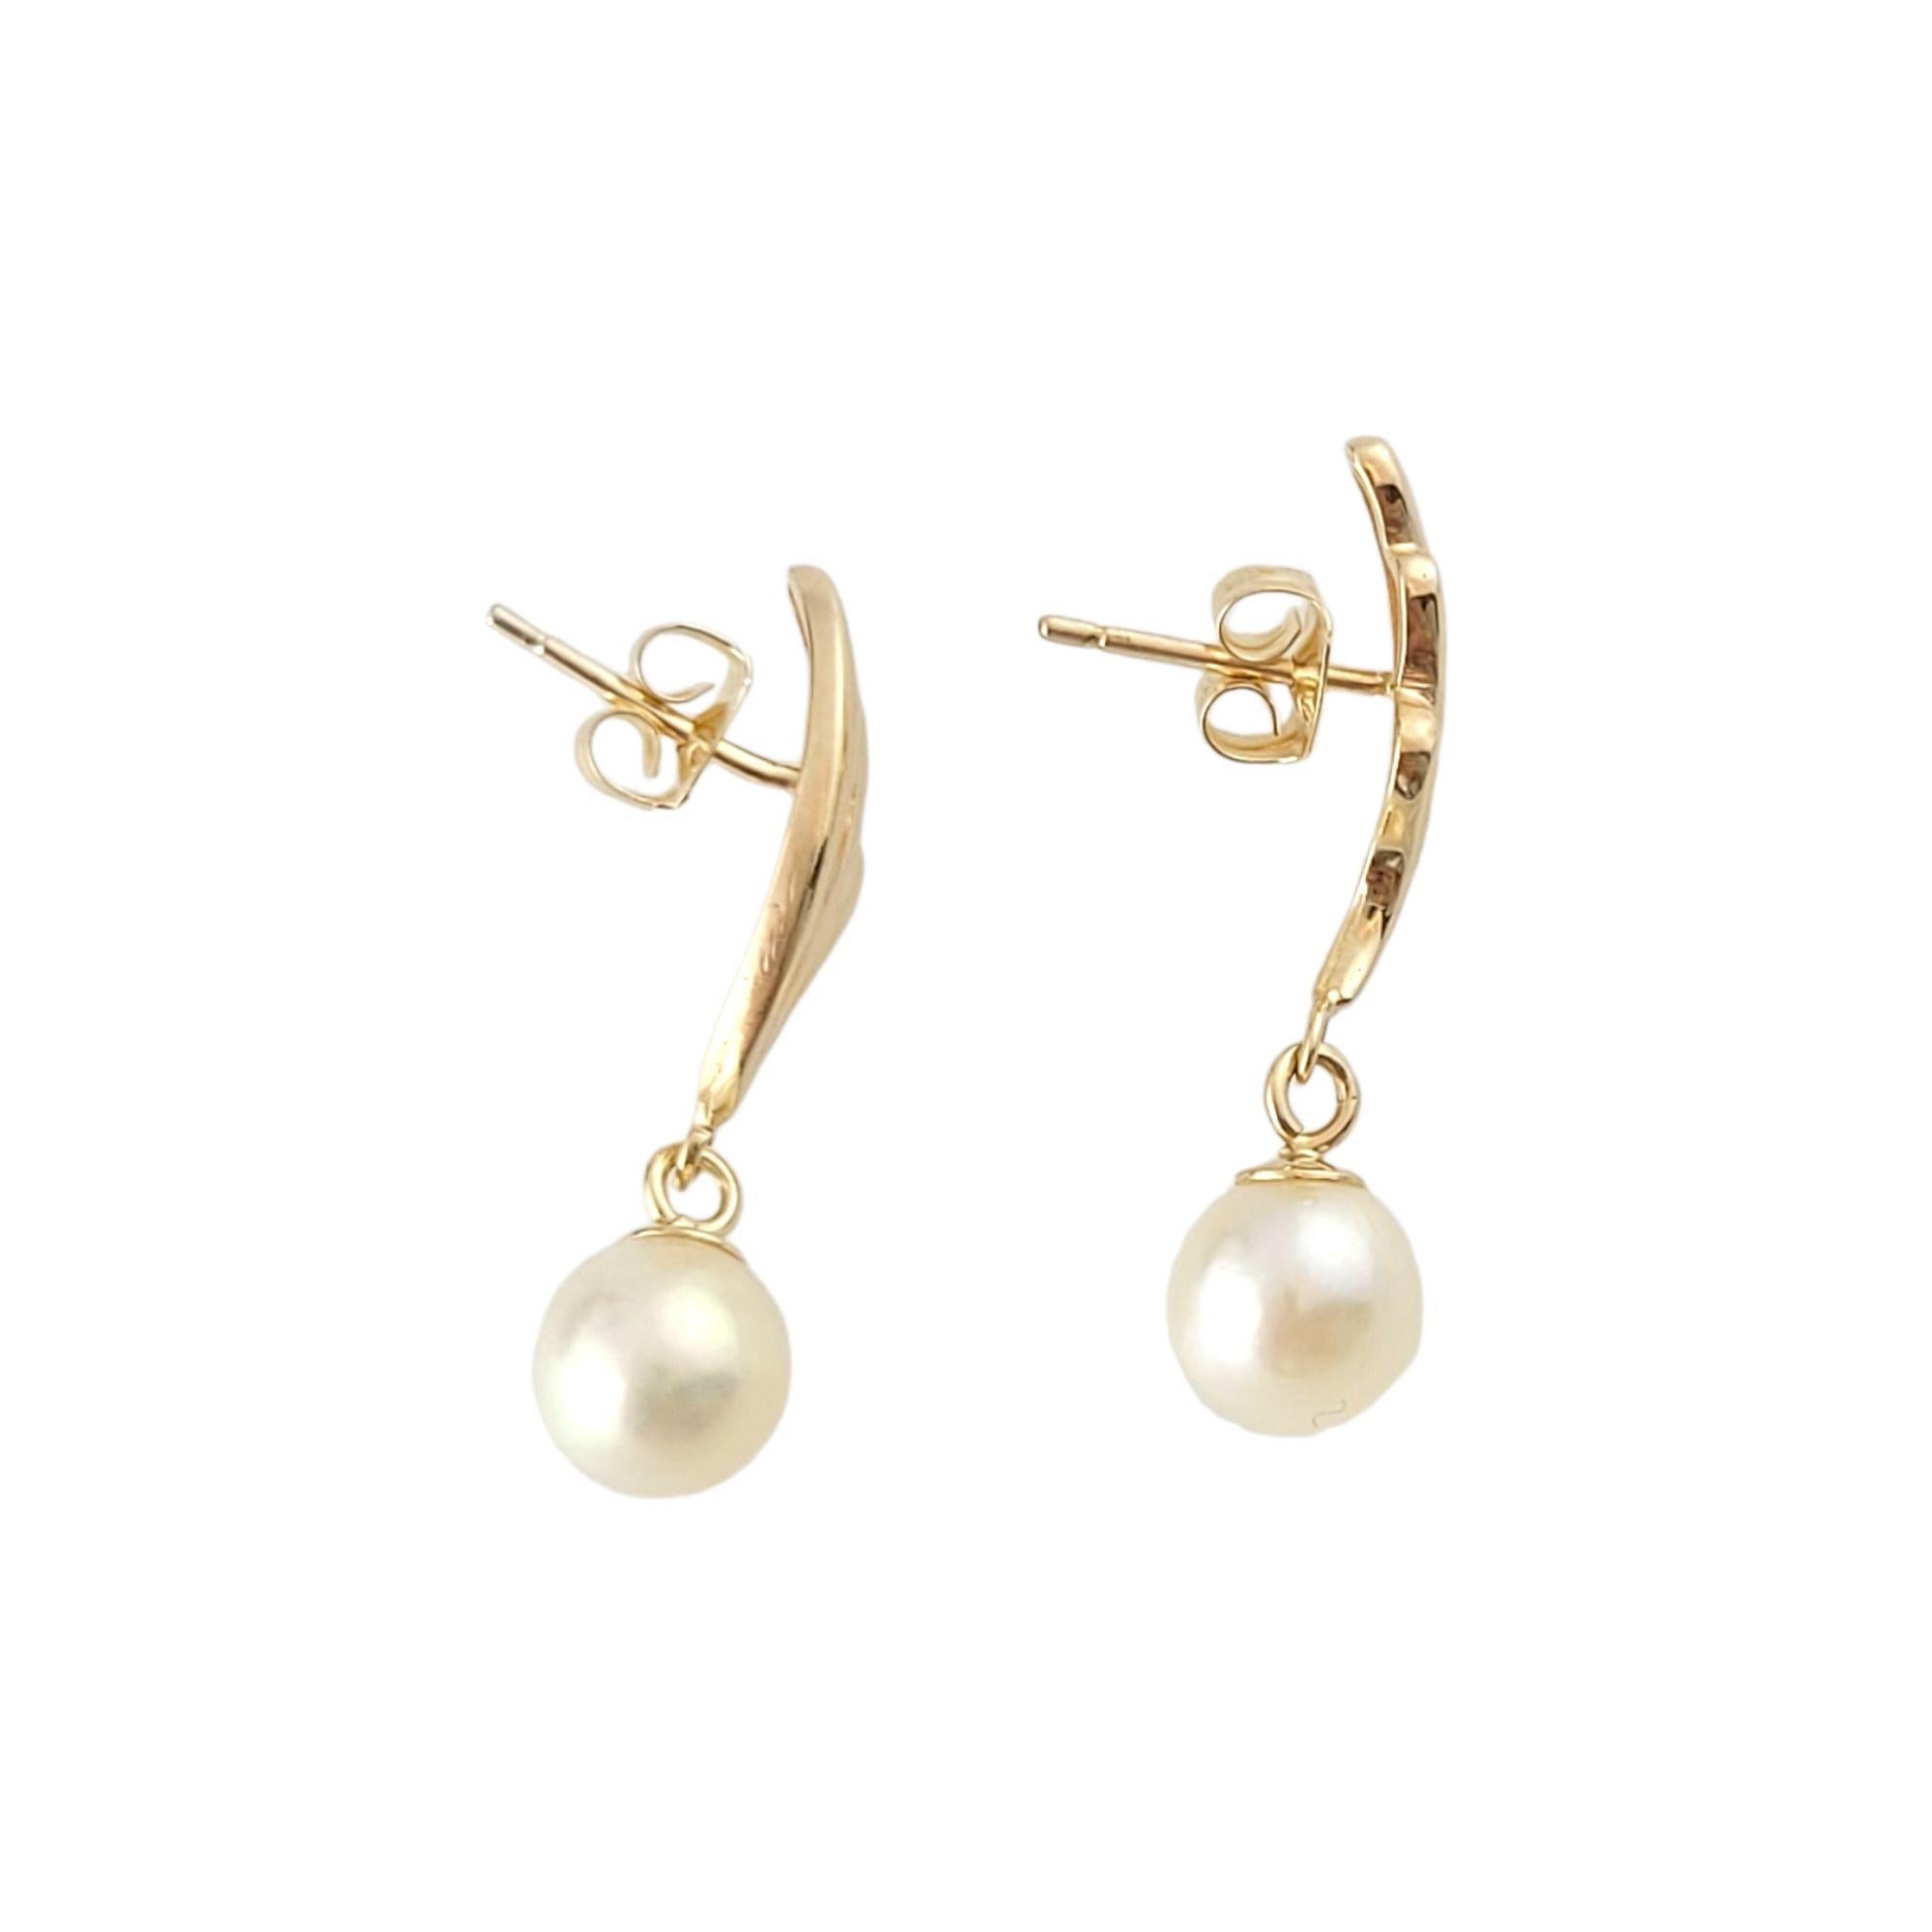 Beautiful set of dangle earrings with 2 gorgeous pearls!

Pearl size: approx. 6.34mm

Dangle length: approx. 14.2mm

Weight: 1.9 g/ 1.2 dwt

Hallmark: MG 14K

Very good condition, professionally polished.

Will come packaged in a gift box or pouch